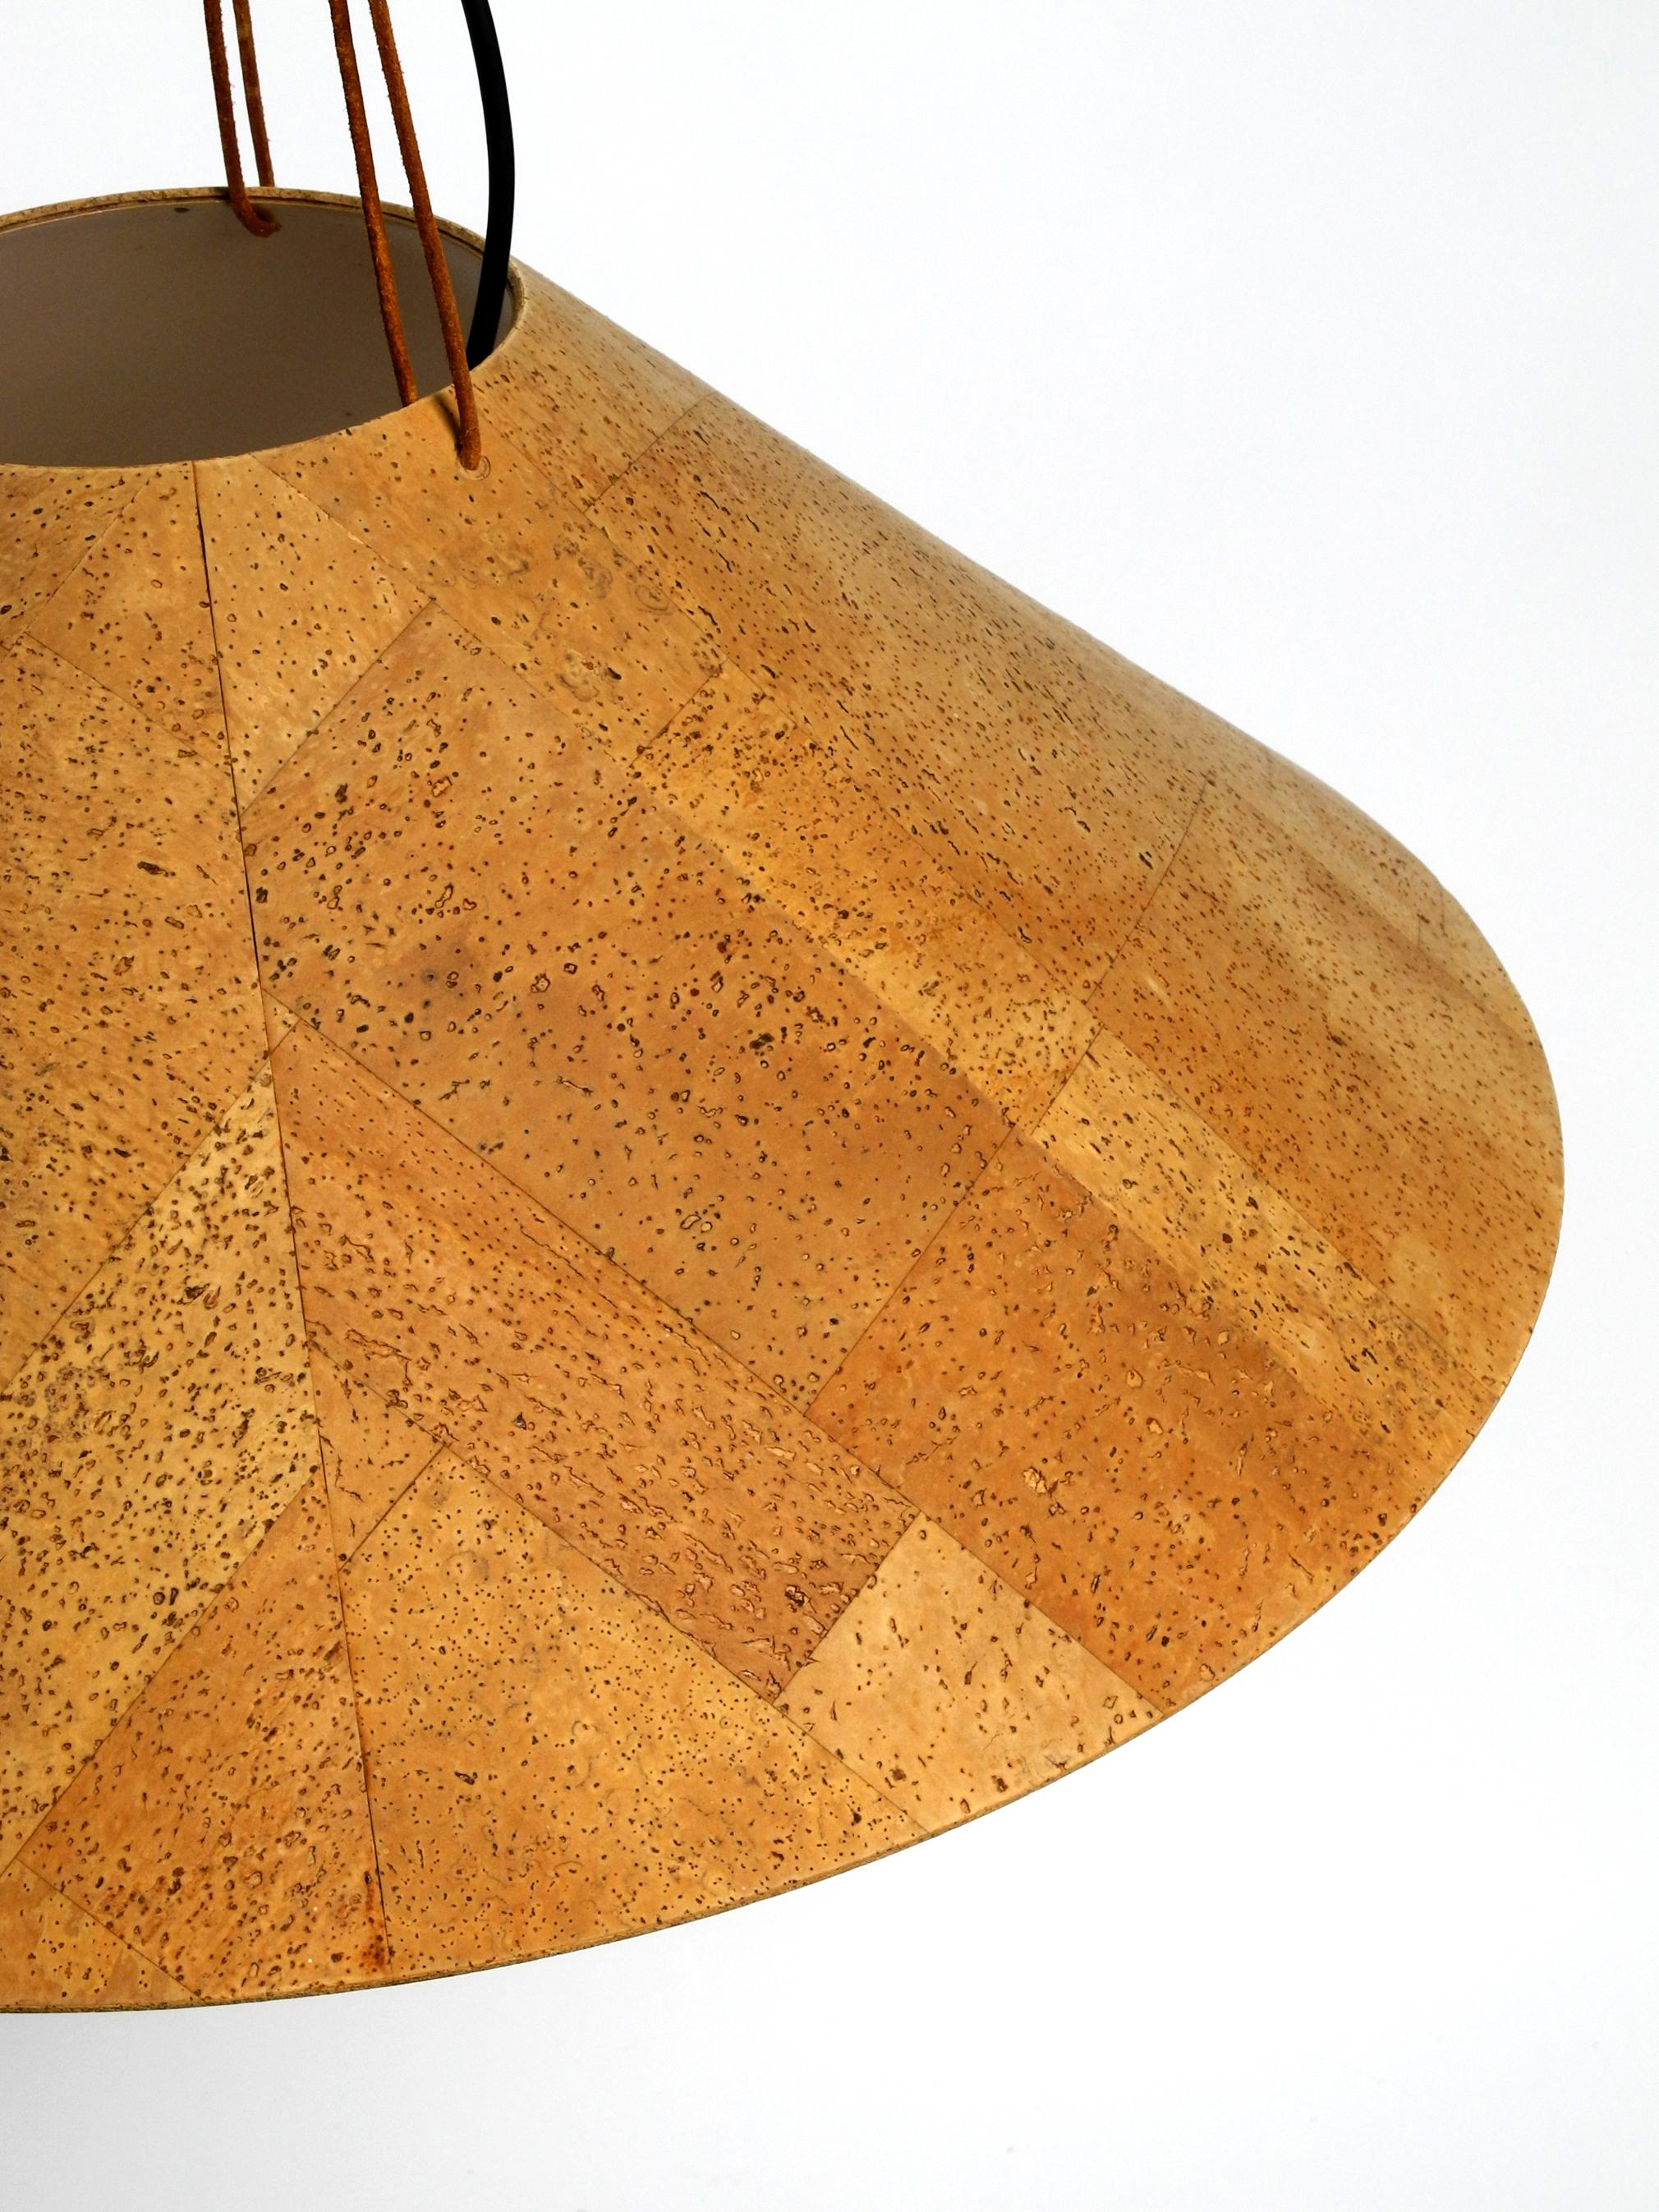 Large 70s Cork Ceiling Lamp by M-Design Design Willhelm Zanoth and Ingo Maurer For Sale 6